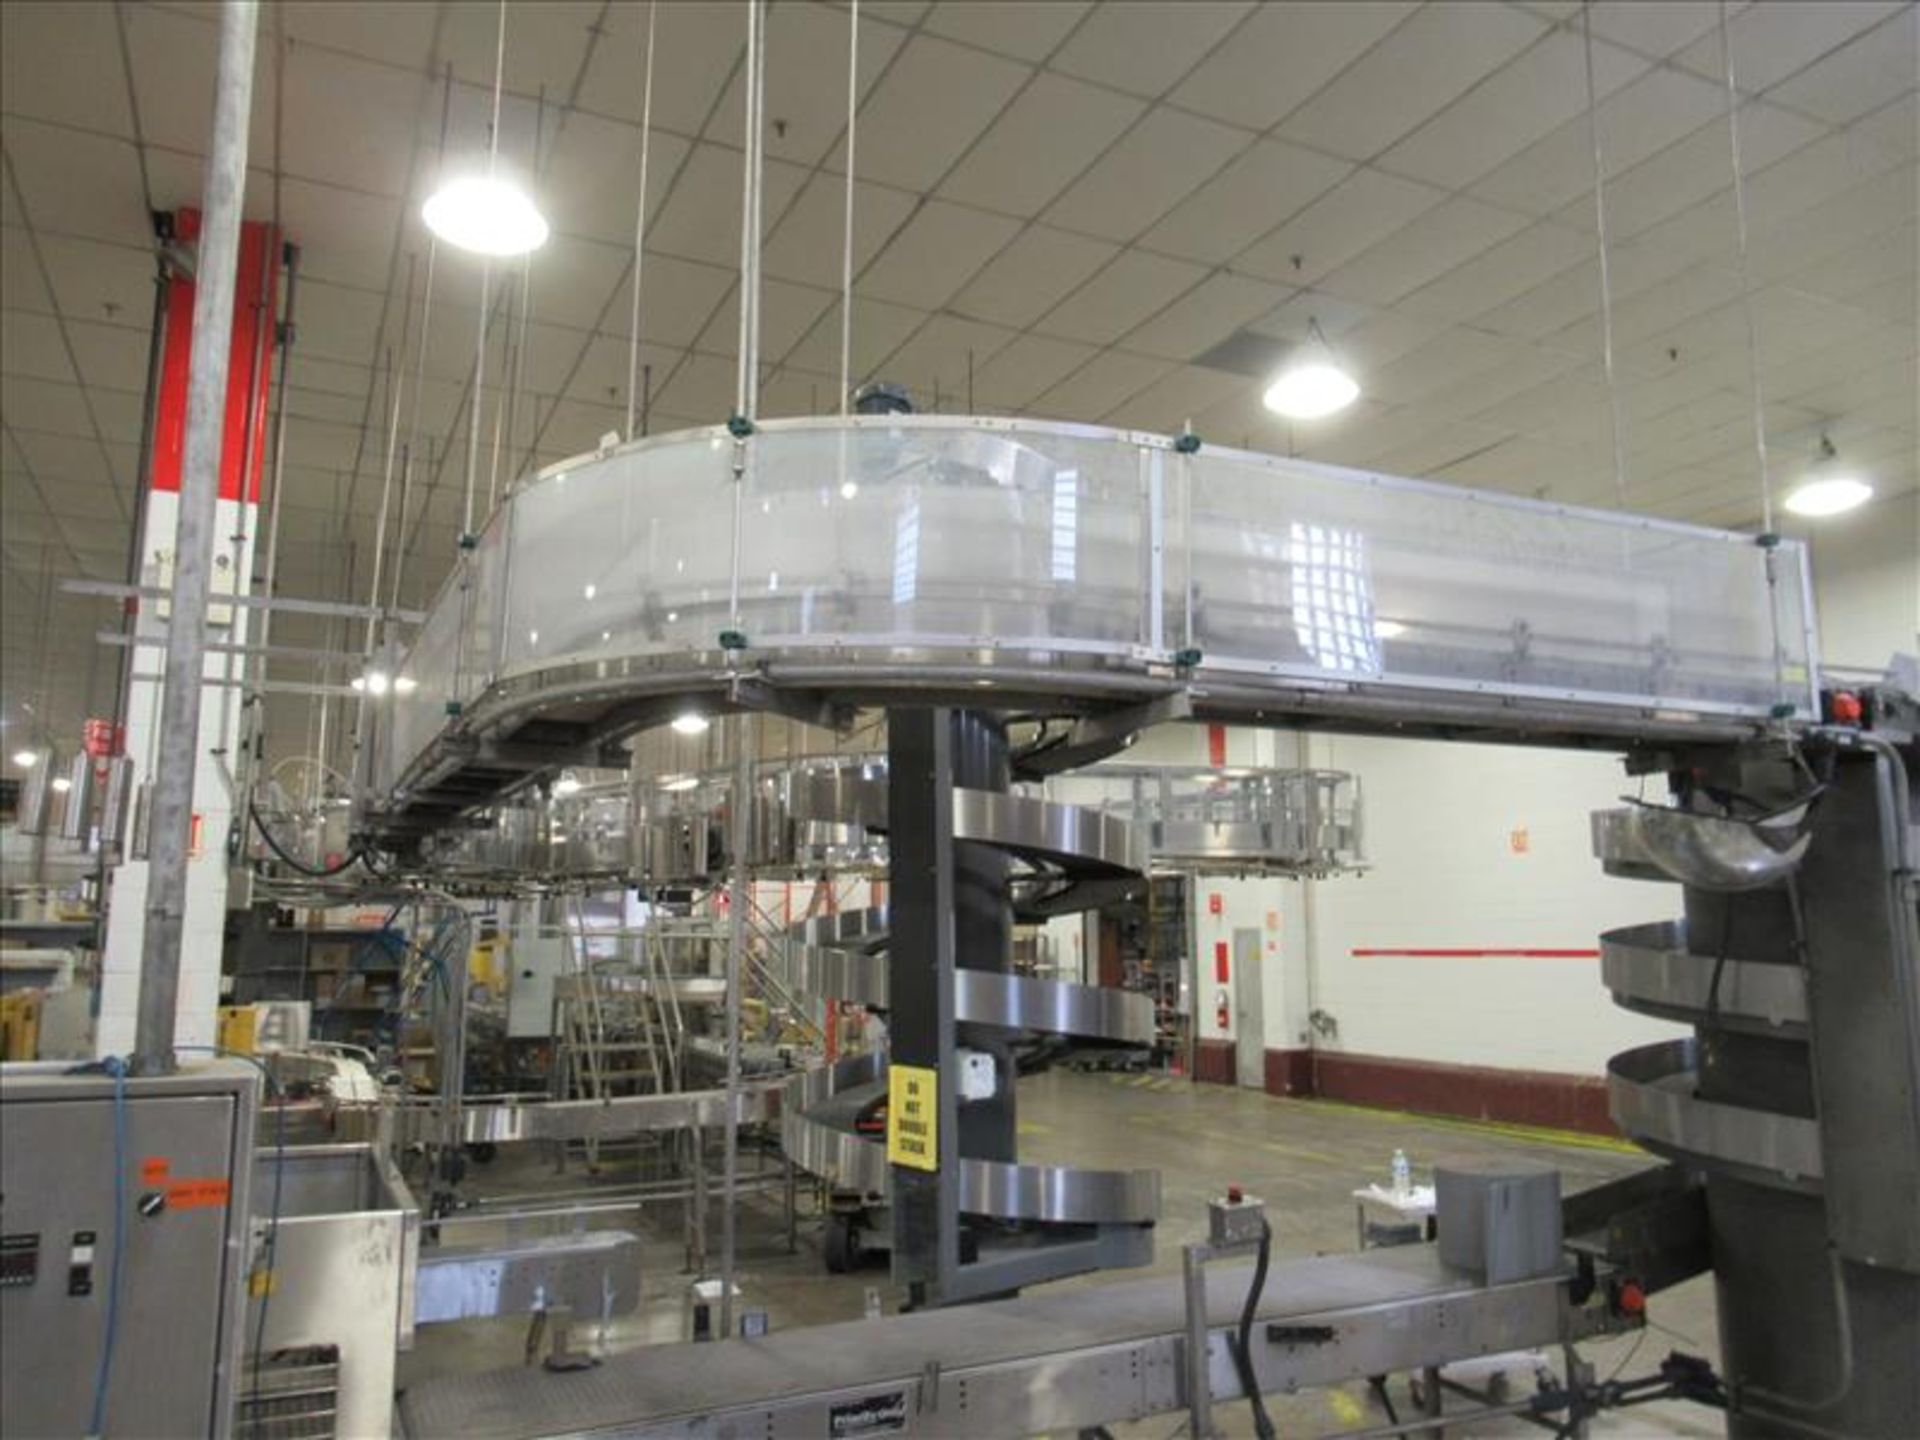 Overhead case conveyor approx 120 to 150 ft. long, extending to palletizing stations, stainless - Image 2 of 4